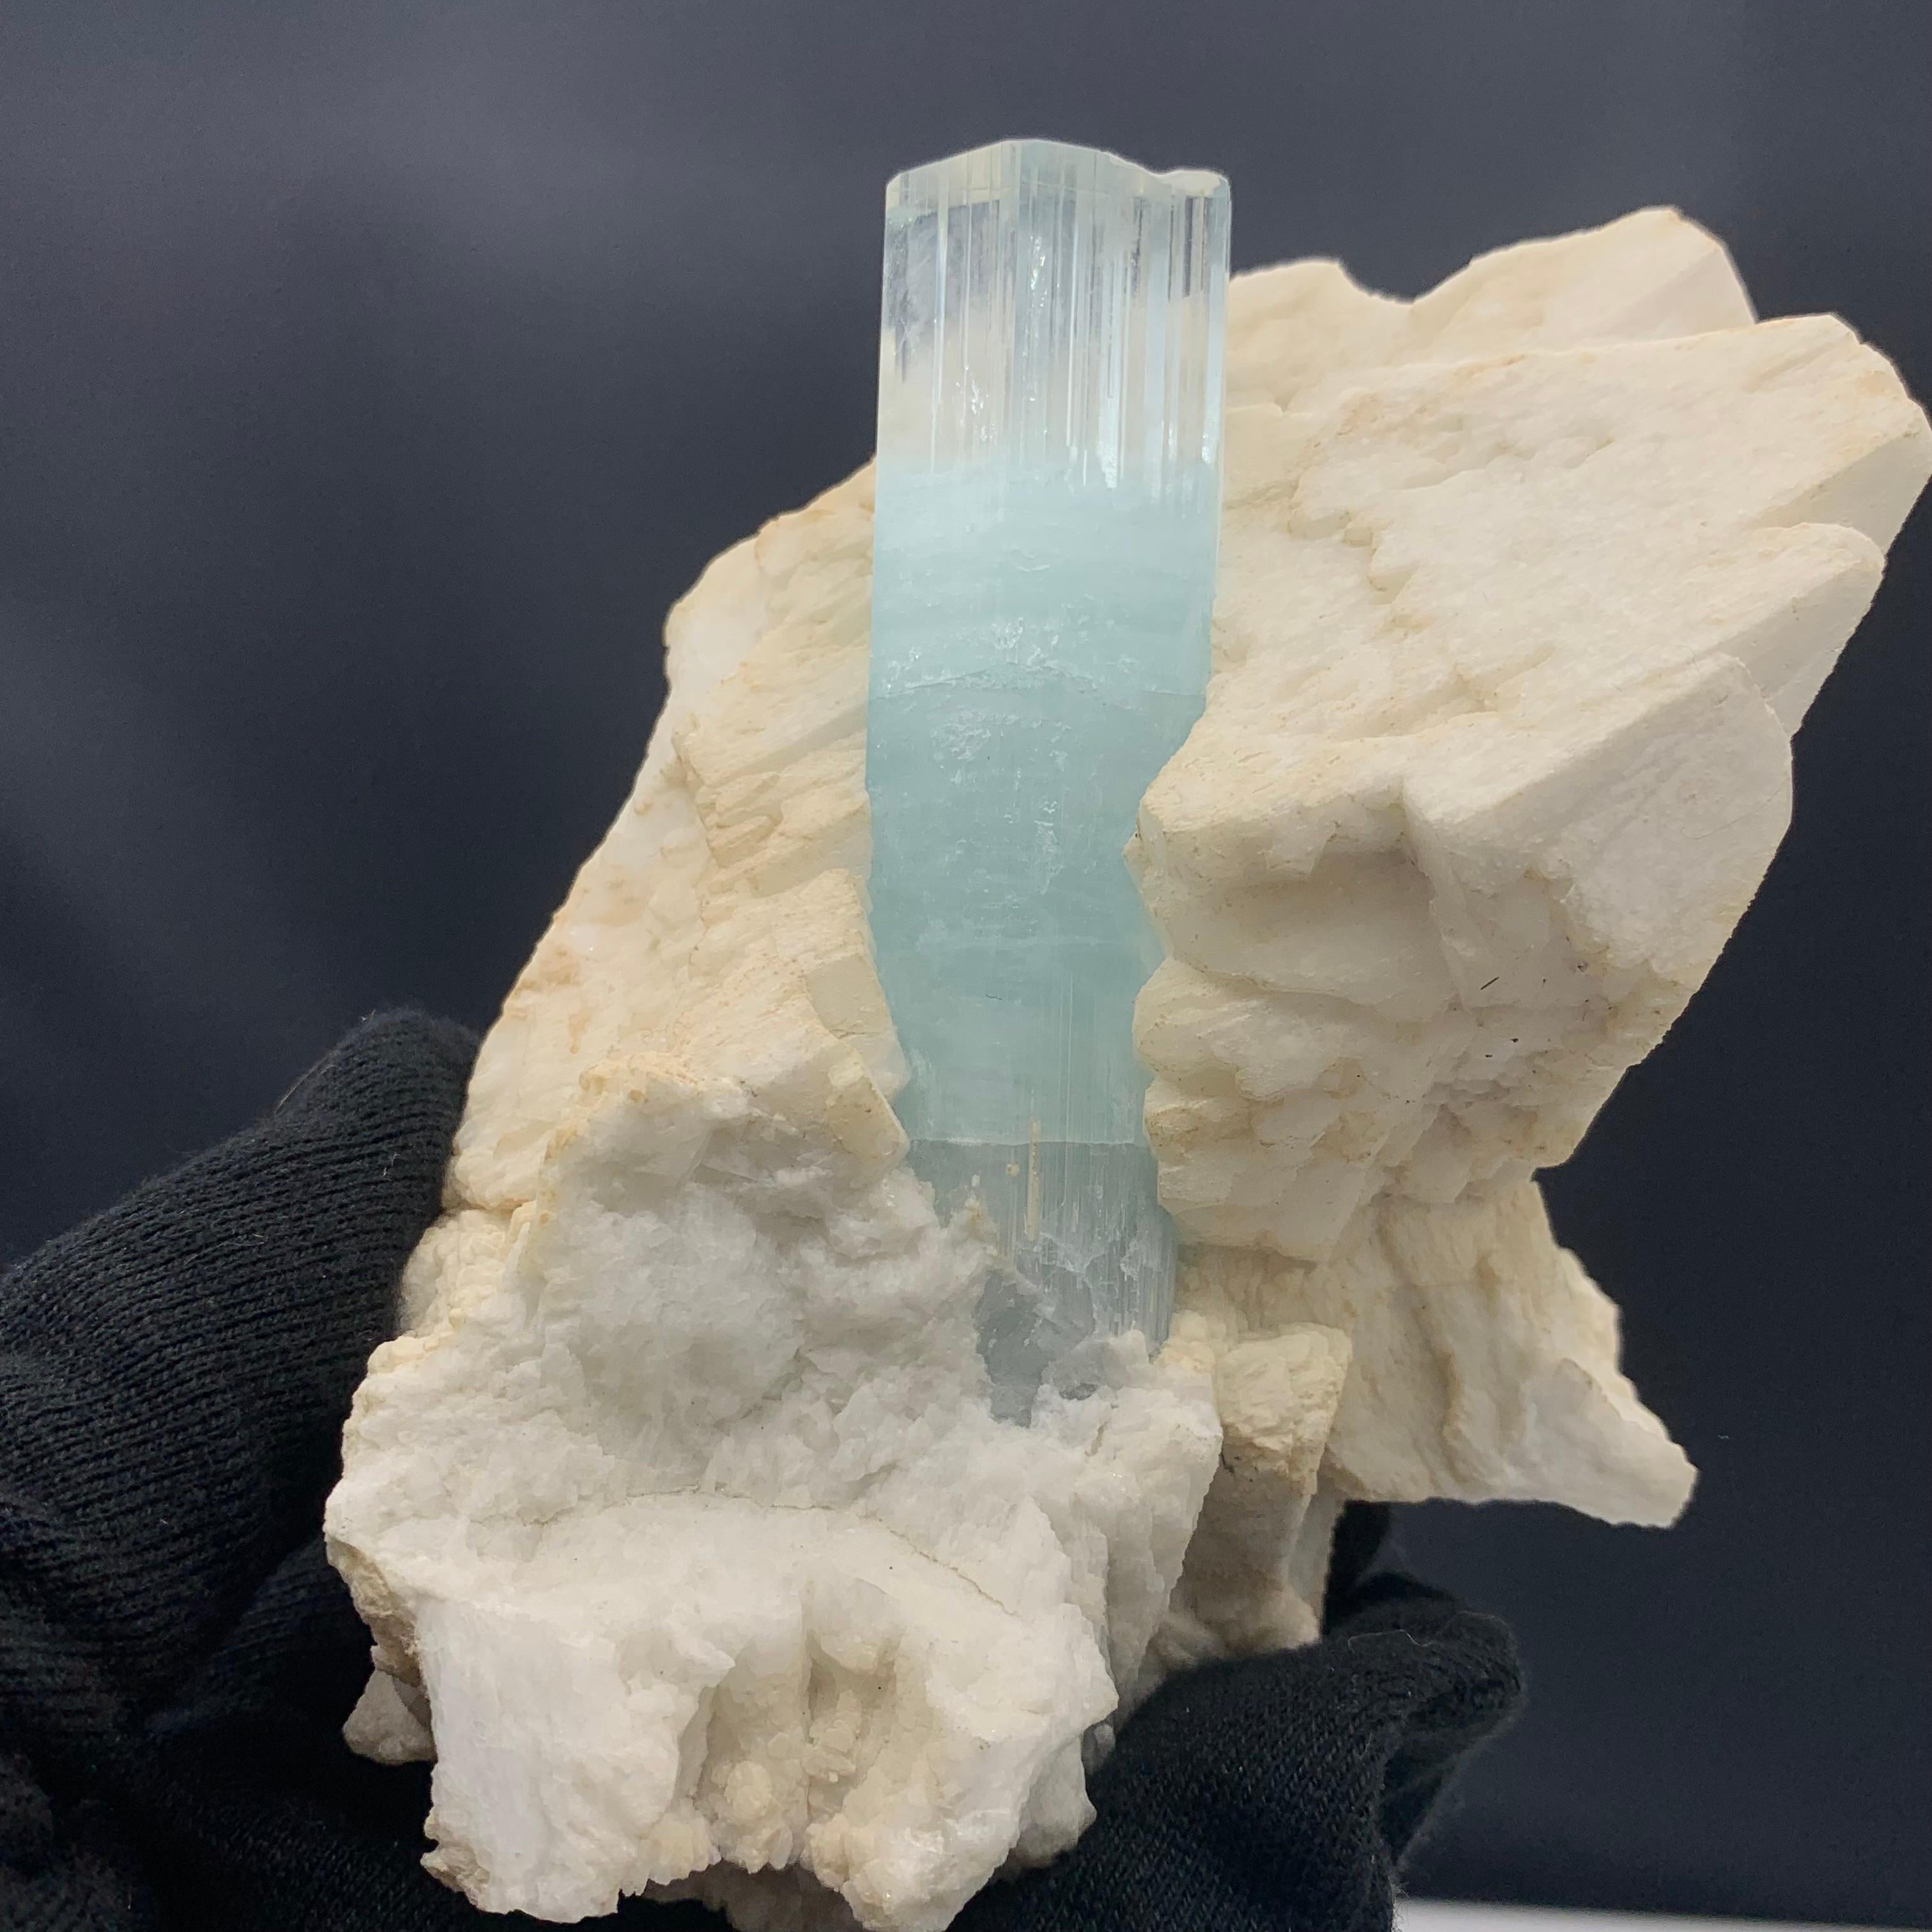 750 Gram Attractive Aquamarine Specimen With Attach with Feldspar From Pakistan 
Weight: 750 Gram 
Dimension: 13.5 x 9.7 x 5.6 Cm 
Origin: Skardu, Pakistan 

Aquamarine is a pale-blue to light-green variety of beryl. The color of aquamarine can be